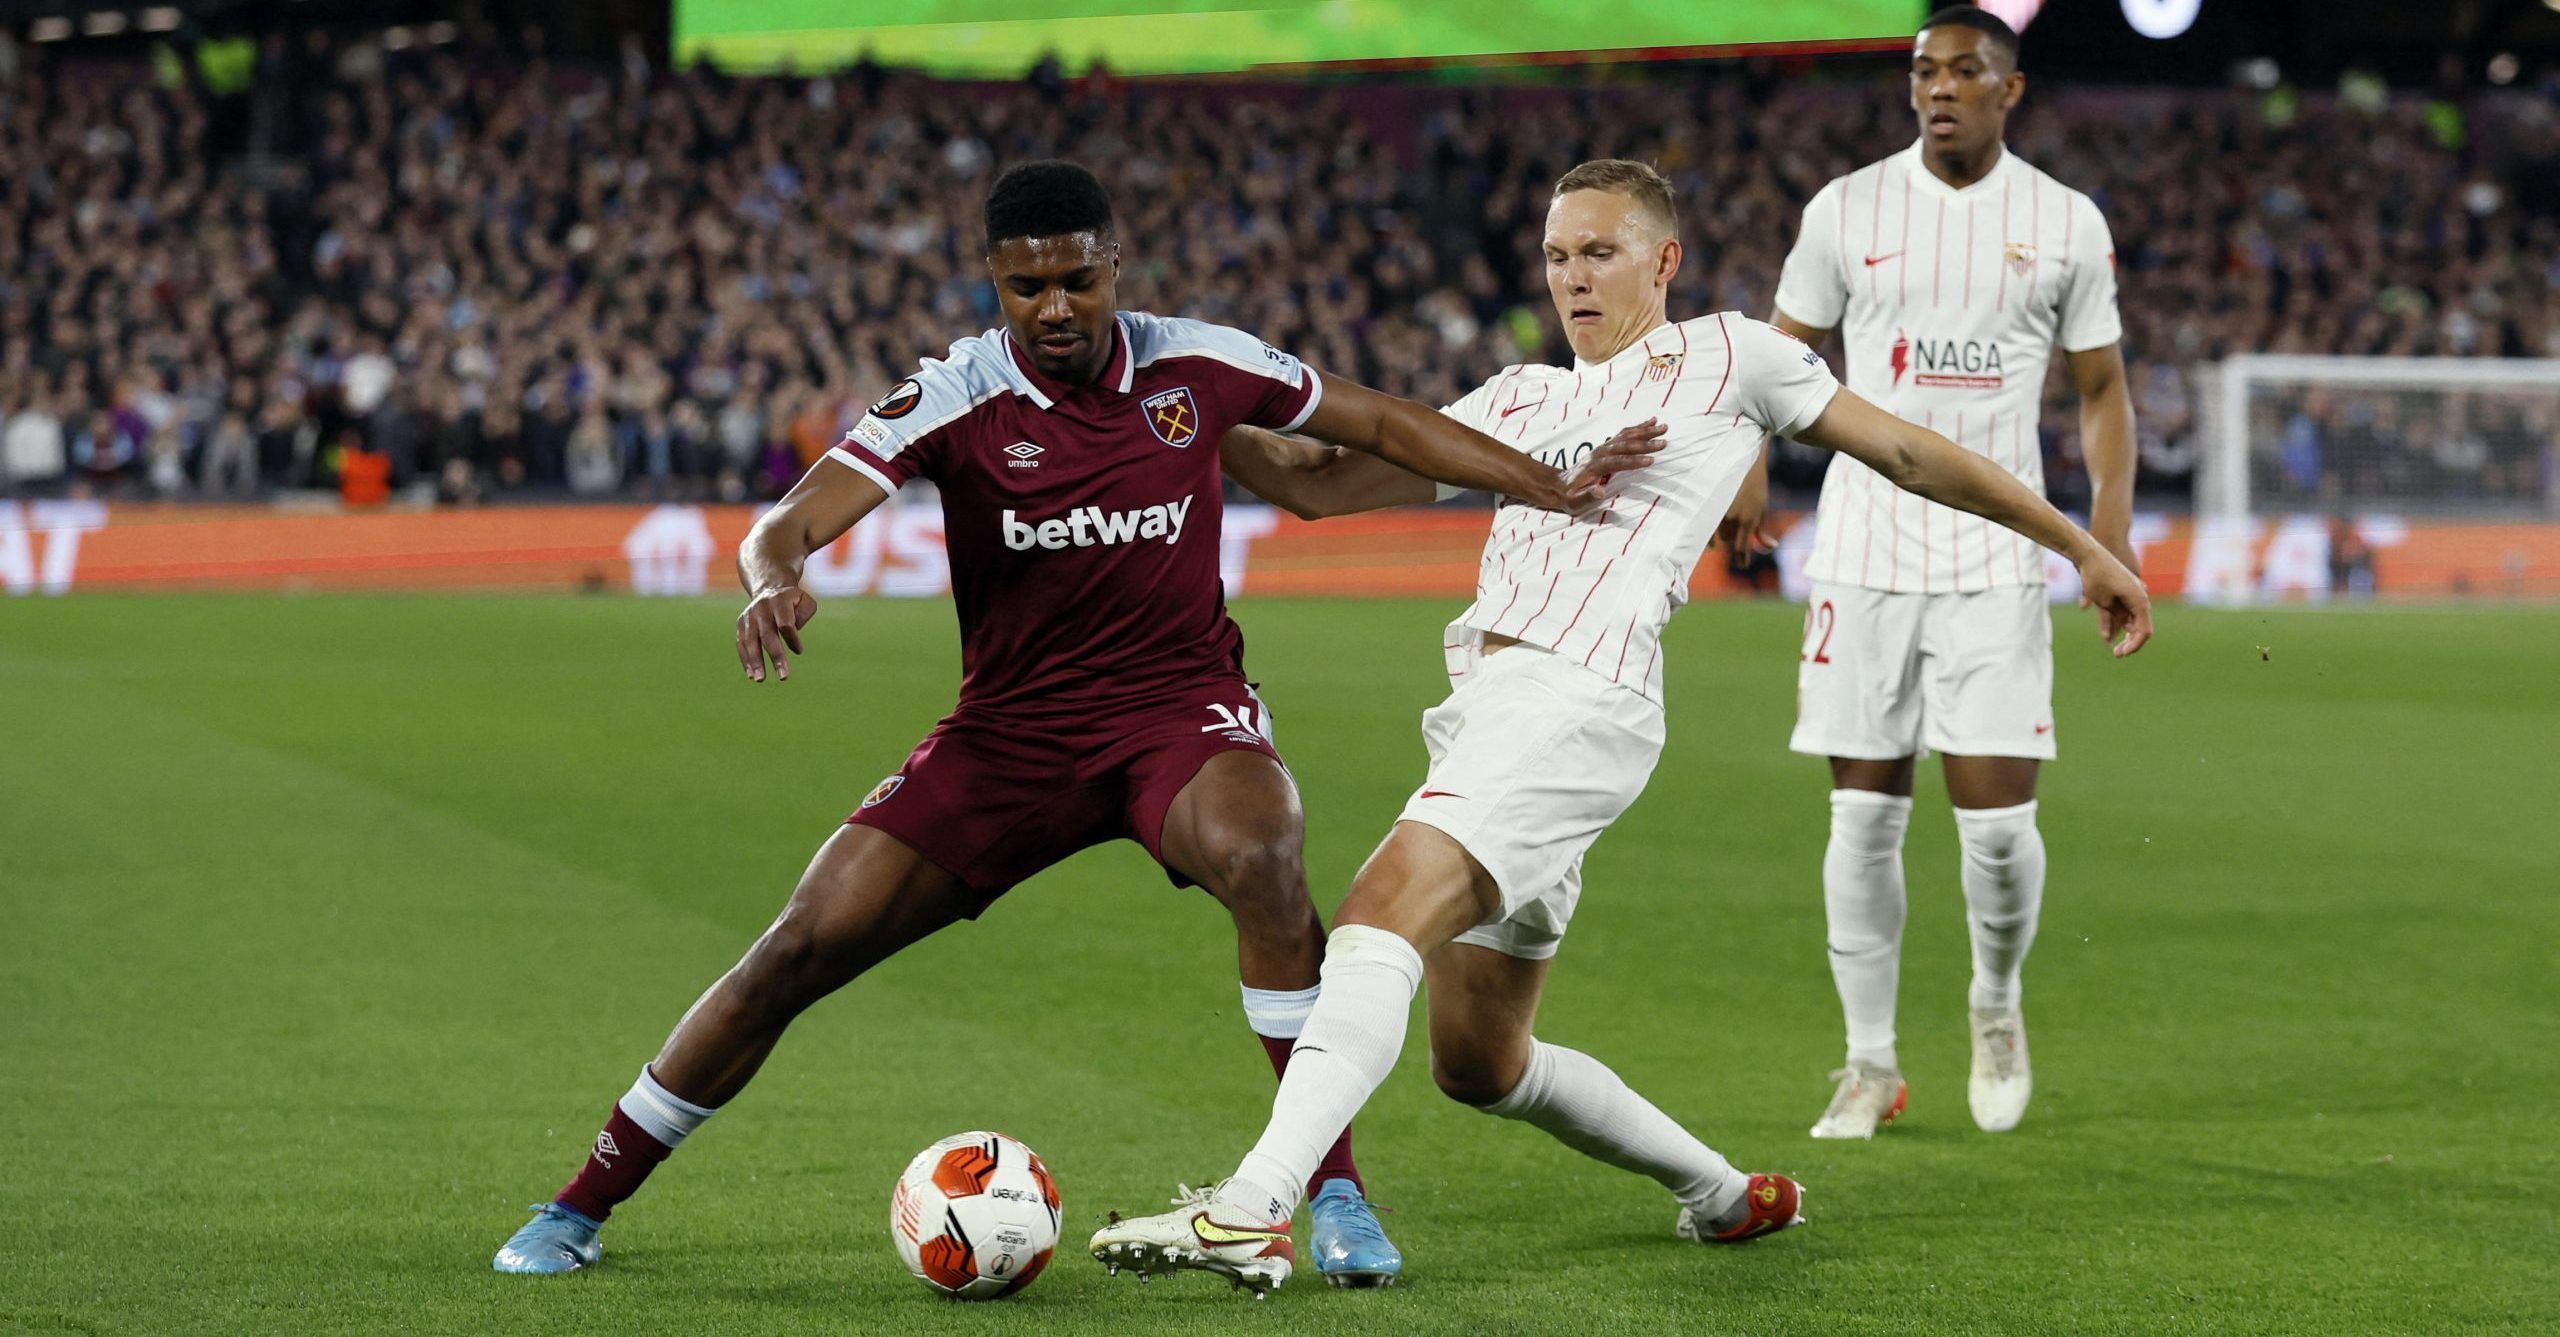 Soccer Football - Europa League - Round of 16 Second Leg - West Ham United v Sevilla - London Stadium, London, Britain - March 17, 2022  West Ham United's Ben Johnson in action with Sevilla's Ludwig Augustinsson Action Images via Reuters/Andrew Couldridge